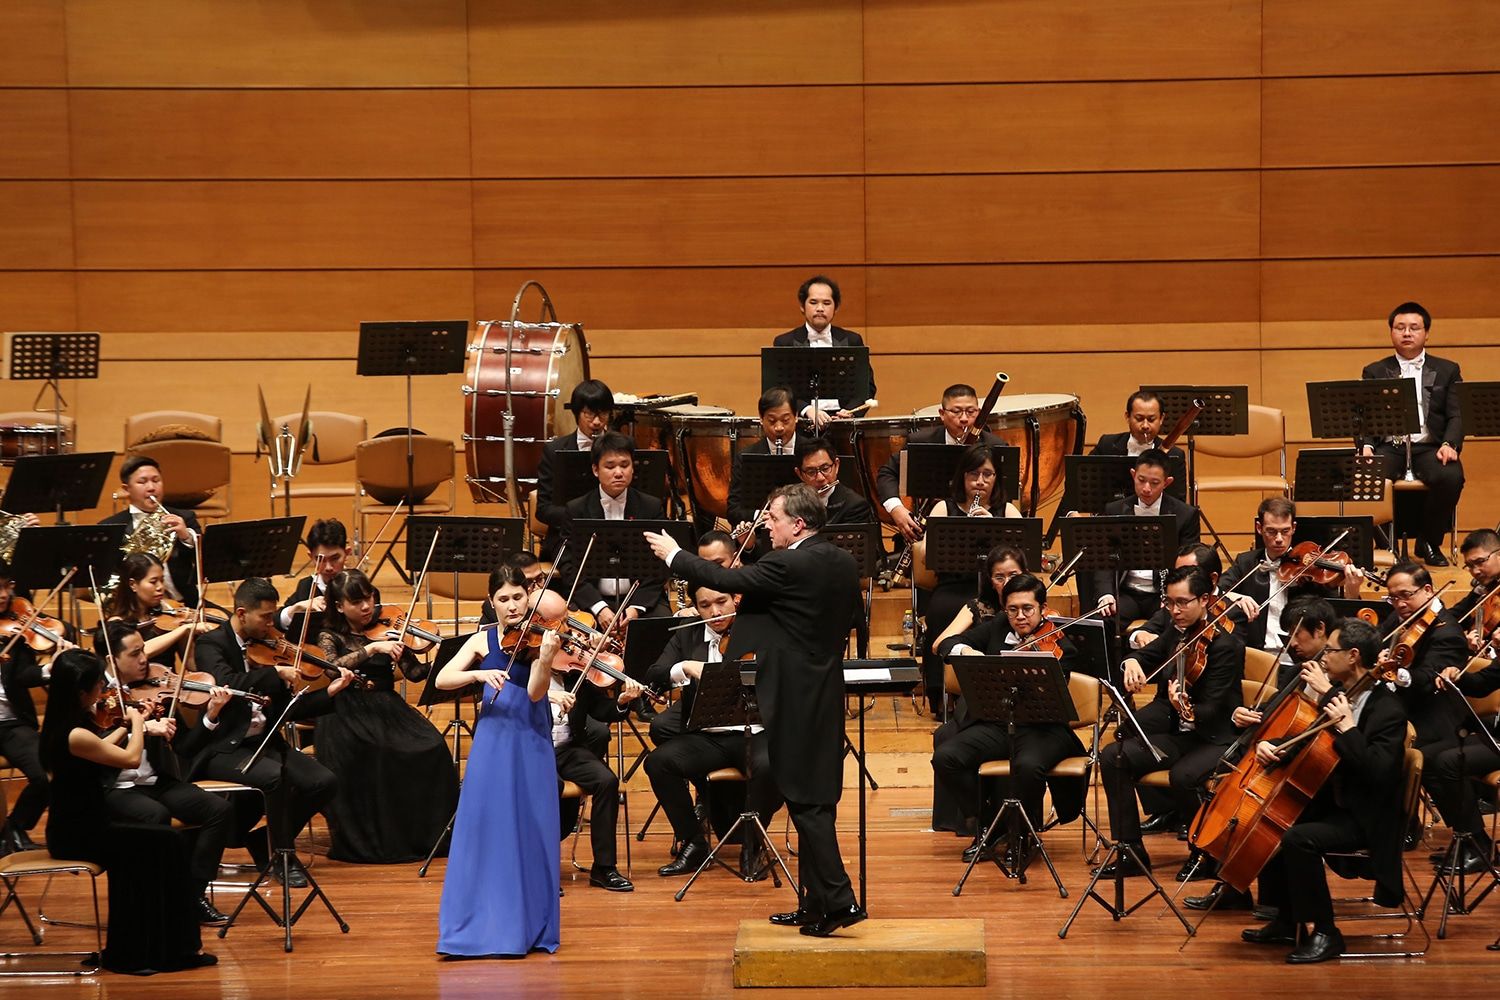 Gallery: RBSO’s ‘Romantic Variations’, the first major concert in 2019